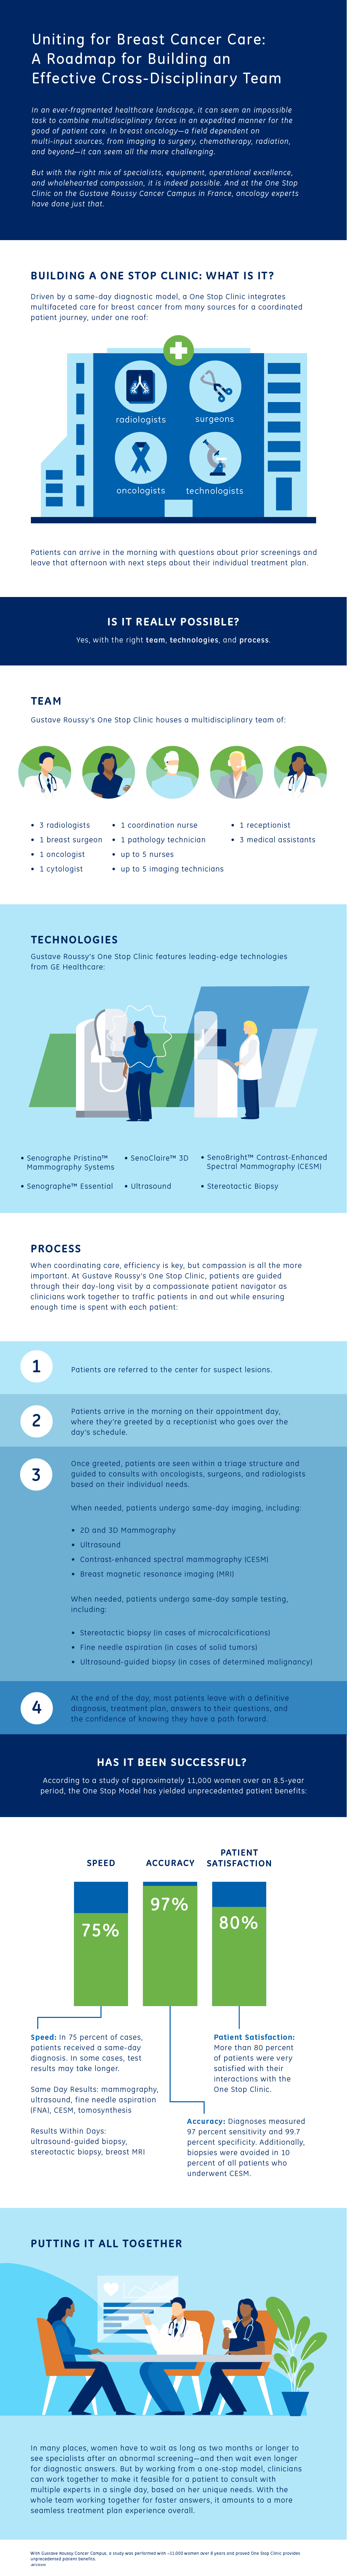 INFOGRAPHIC_Uniting_for_Breast_Cancer_Care_A_Ro_v4-01.png